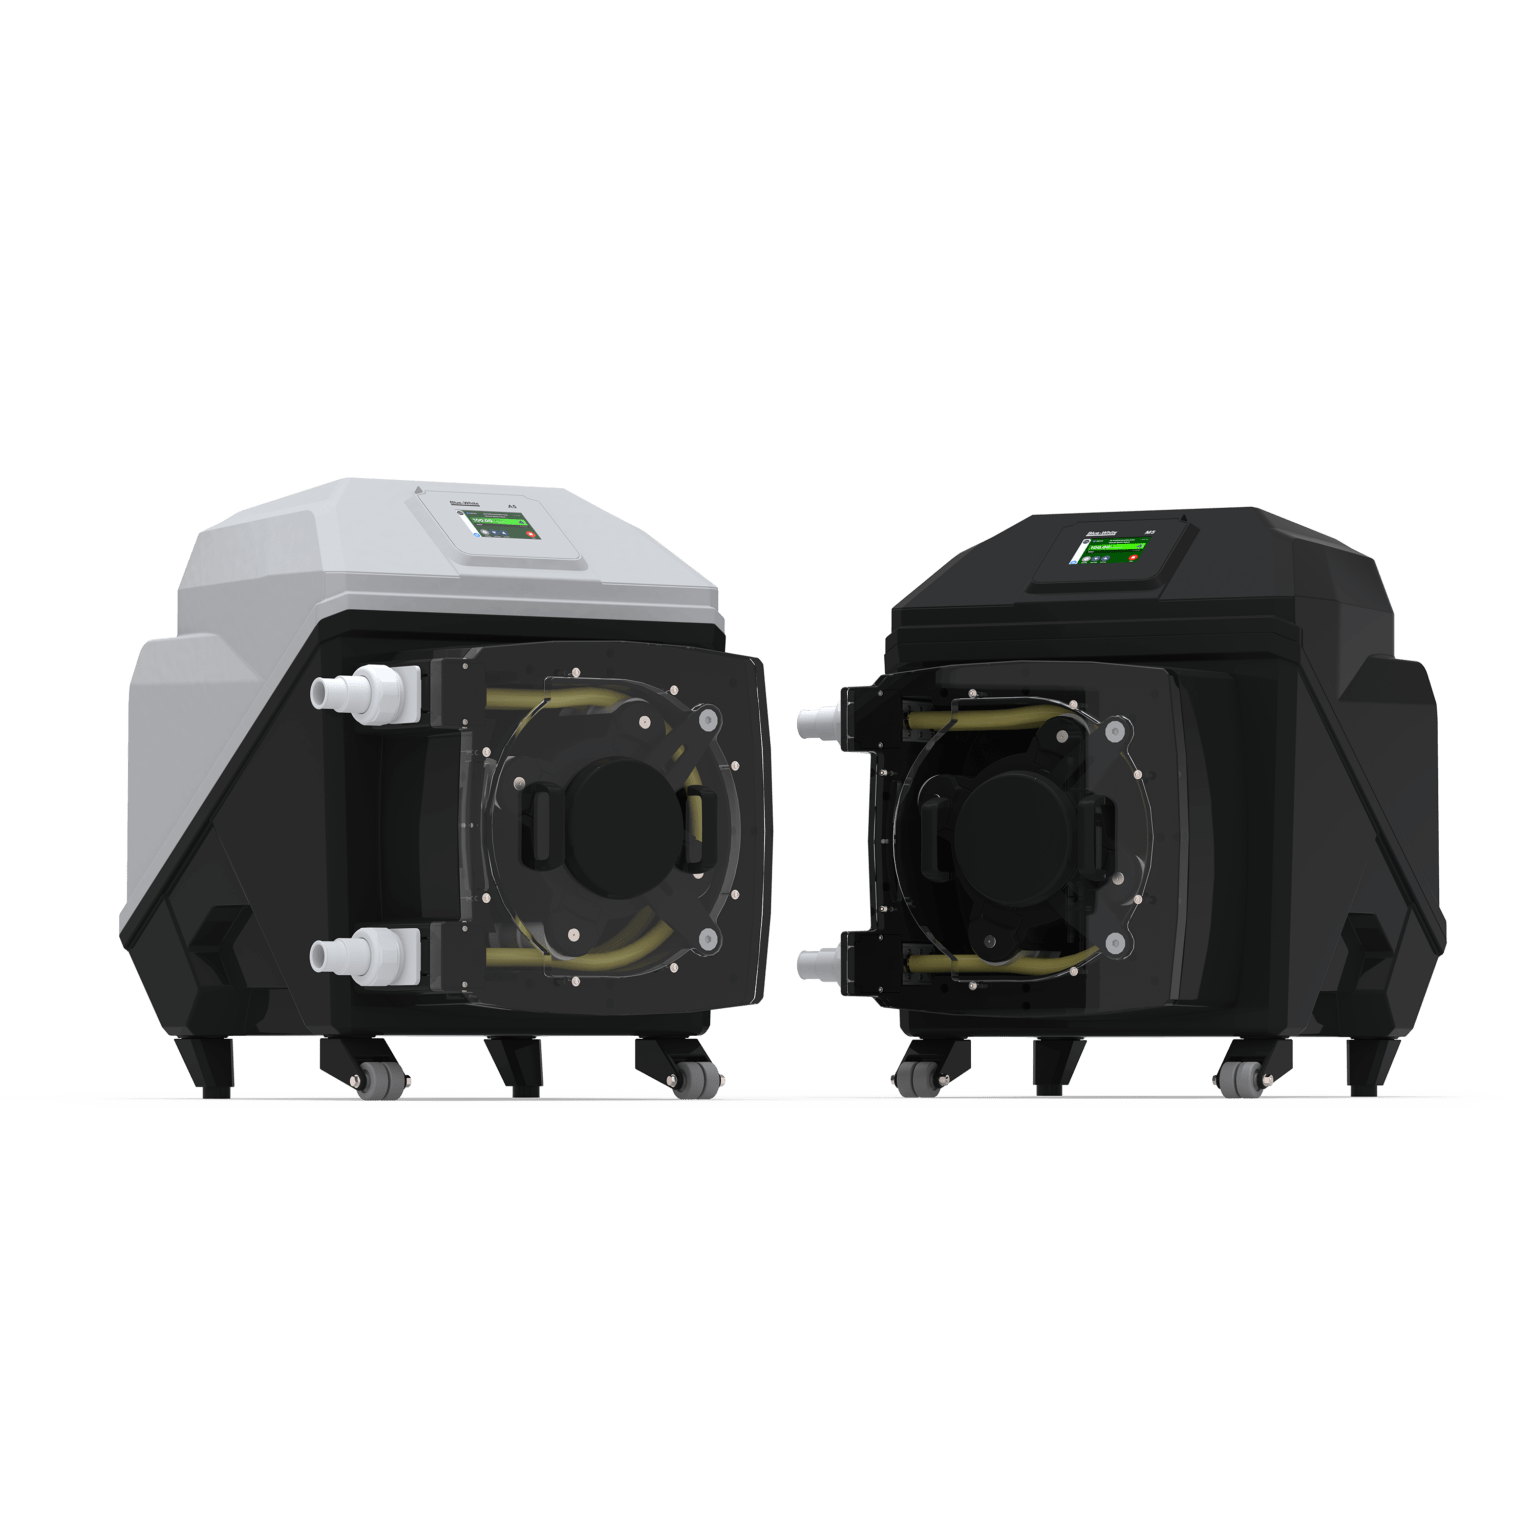 FLEXFLO® A5 and M5 High Volume Peristaltic Metering Pumps